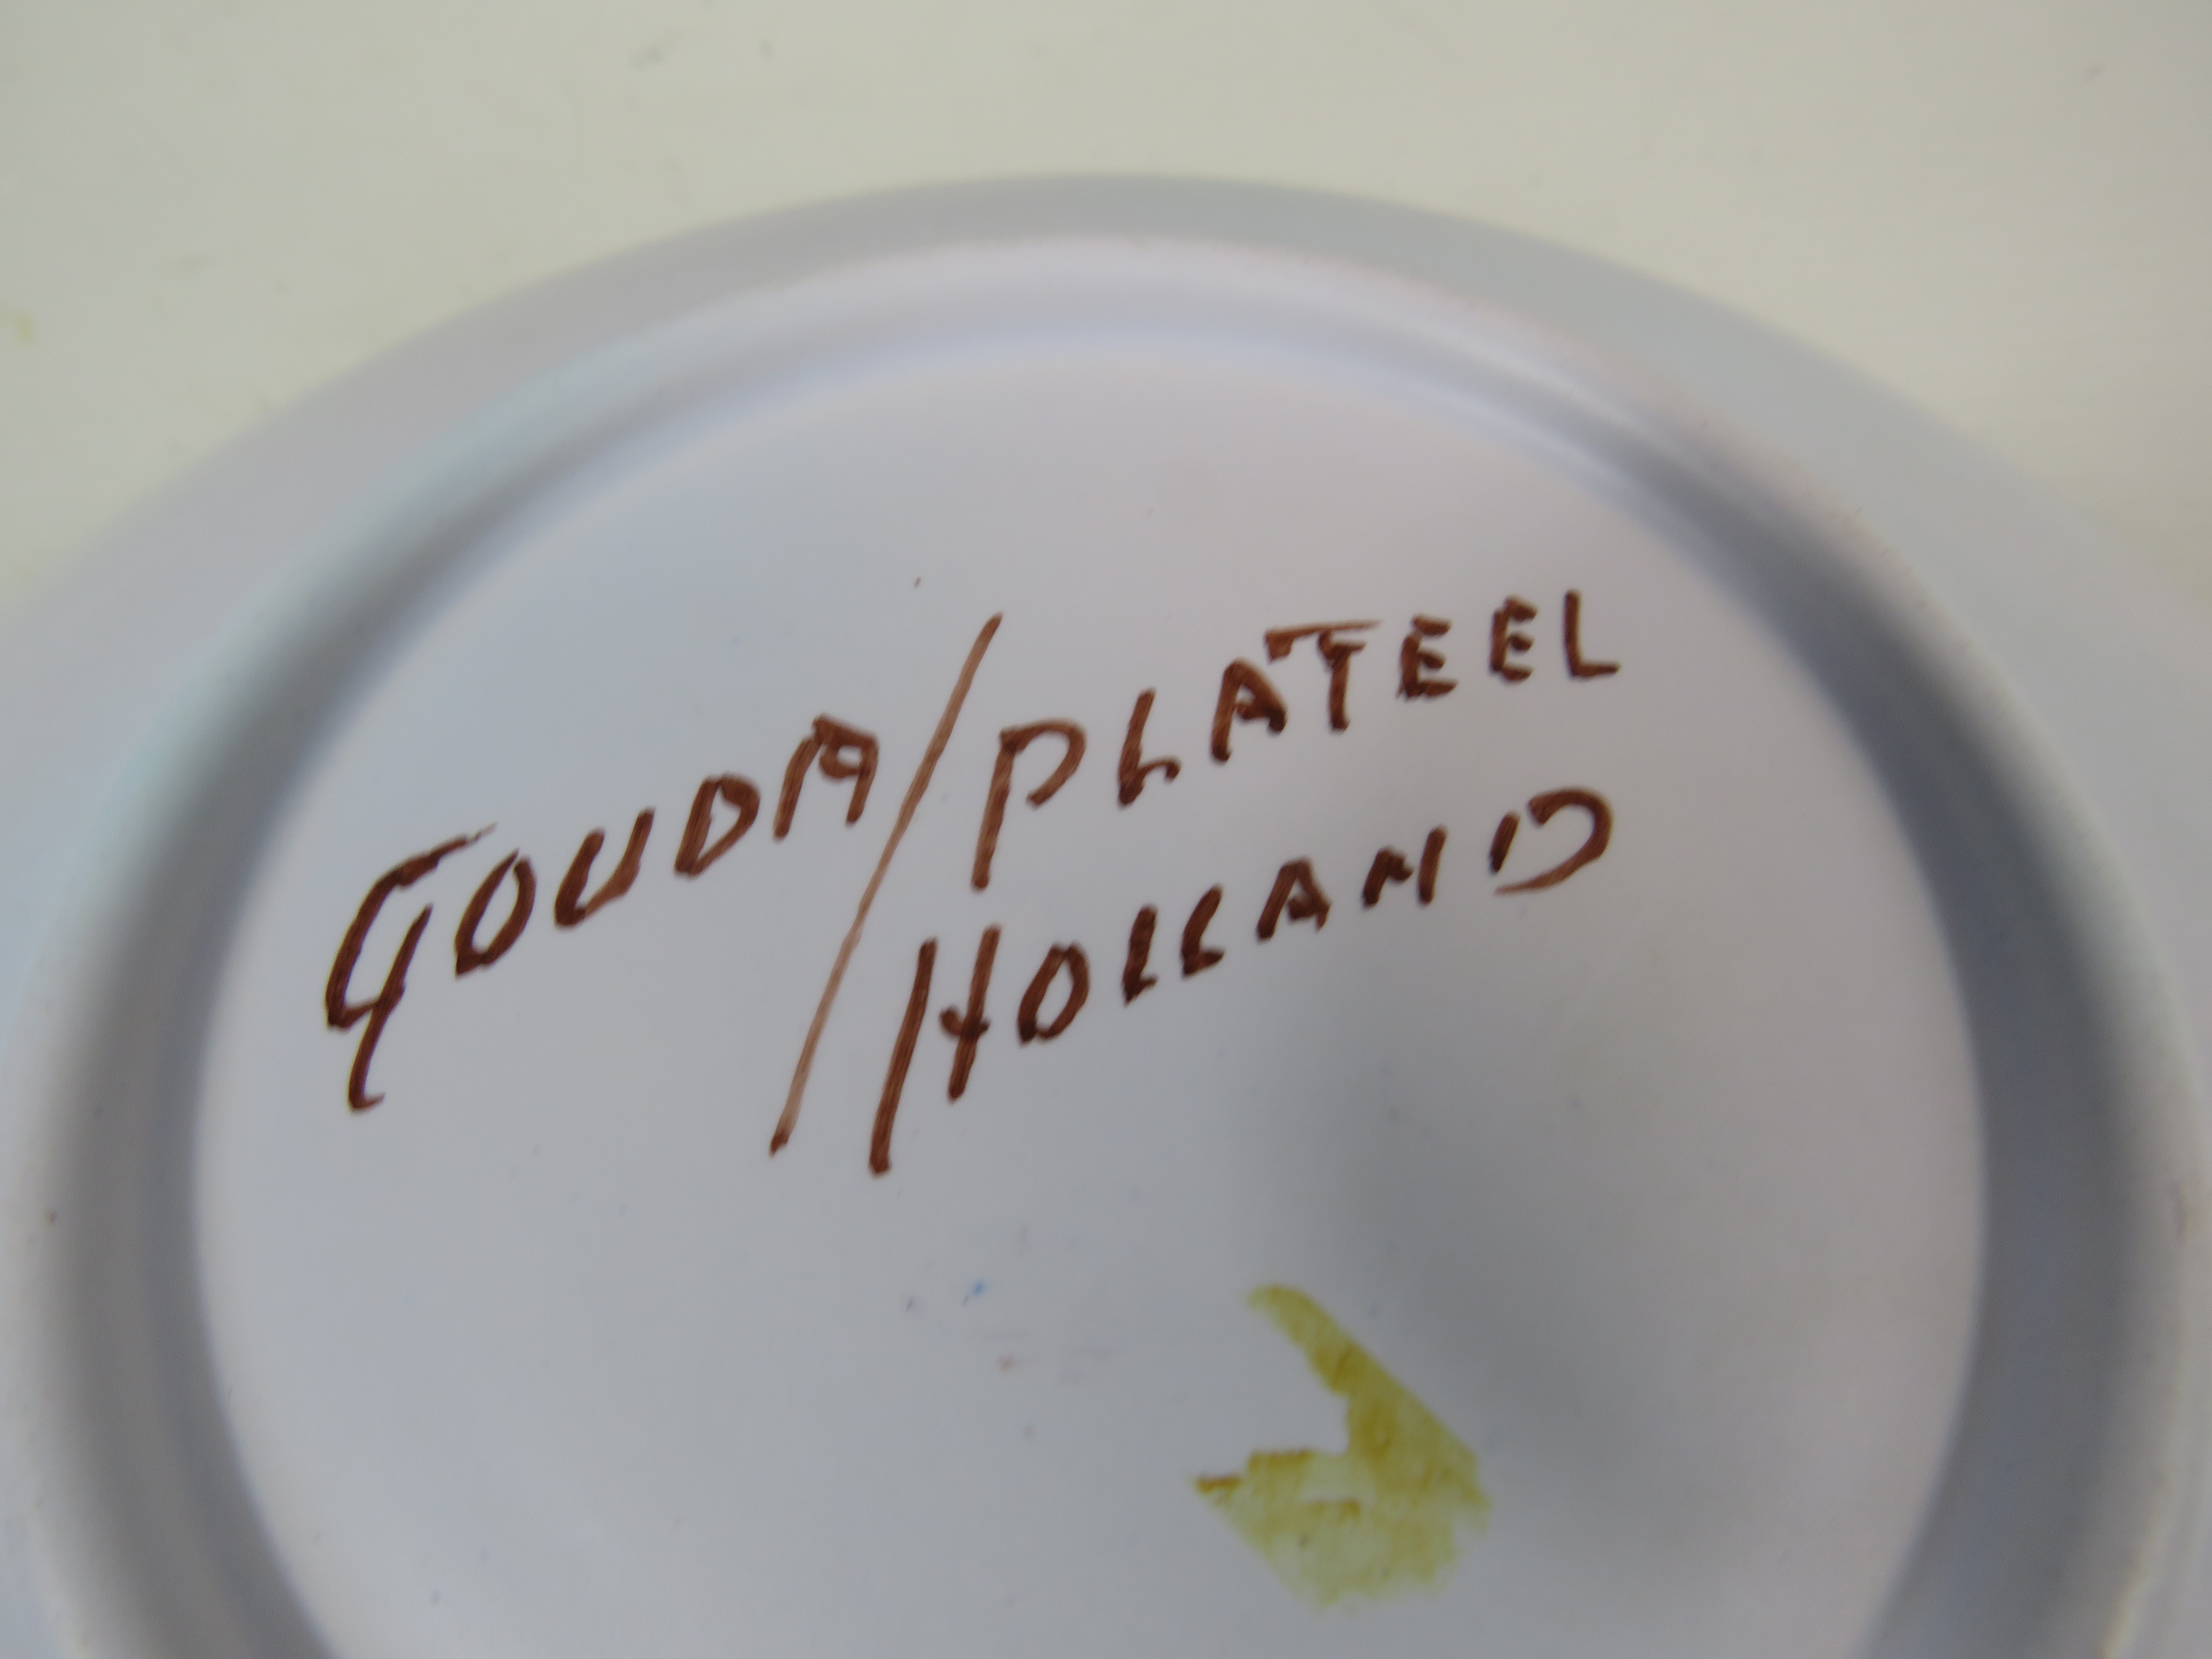 5 Pieces of Gouda Holland art pottery. - Image 3 of 4